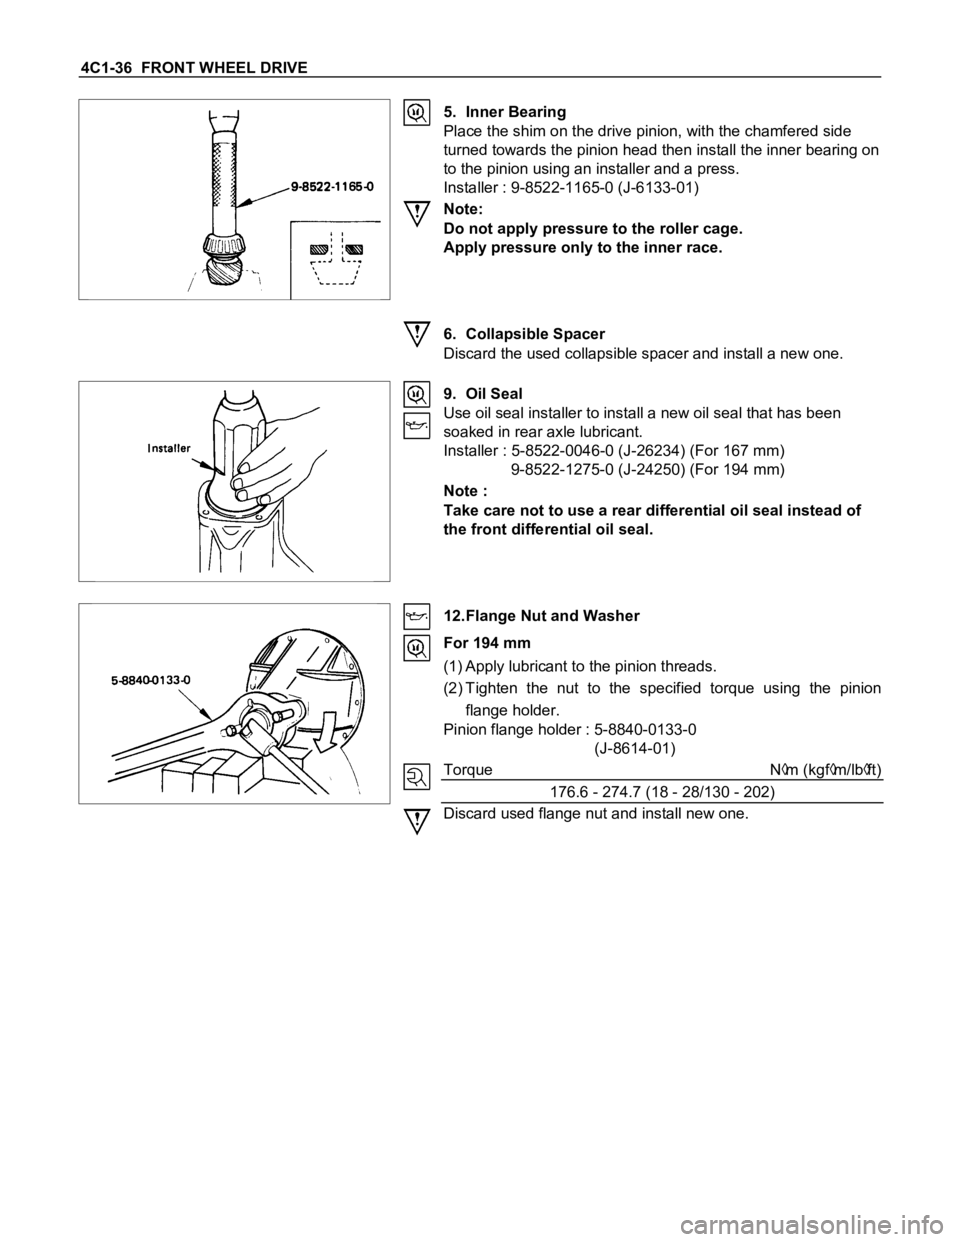 ISUZU TFS SERIES 1997  Workshop Manual 4C1-36  FRONT WHEEL DRIVE
5. Inner Bearing
Place the shim on the drive pinion, with the chamfered side
turned towards the pinion head then install the inner bearing on
to the pinion using an installer